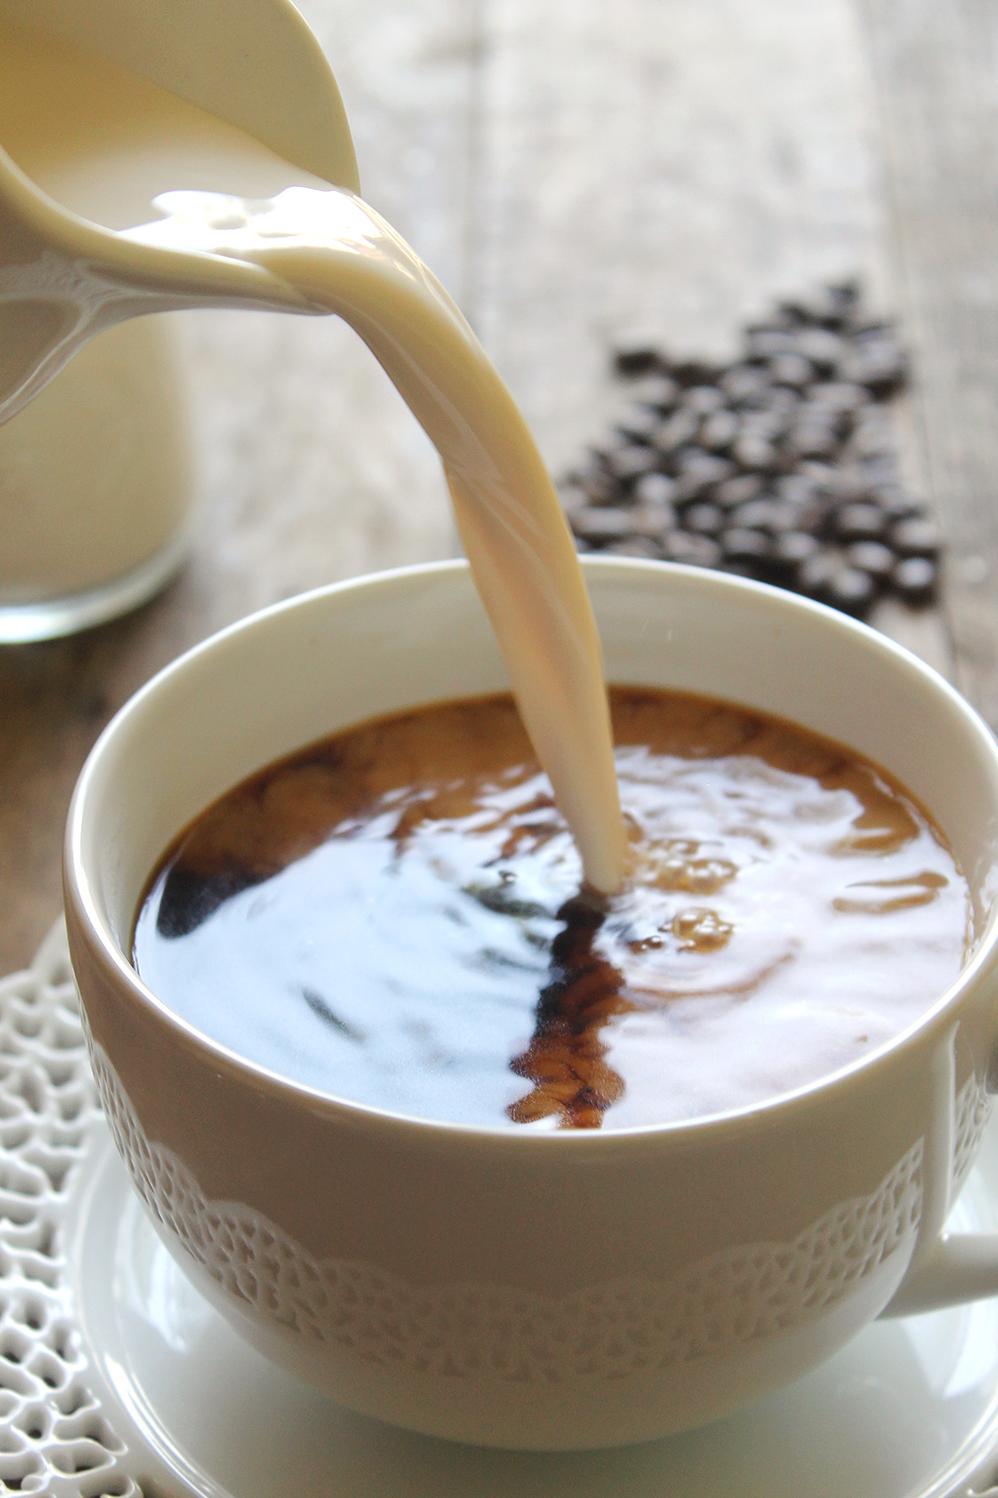  Mix up a batch of this delicious vanilla-infused creamer and store it in the fridge for a week's worth of tasty coffee.